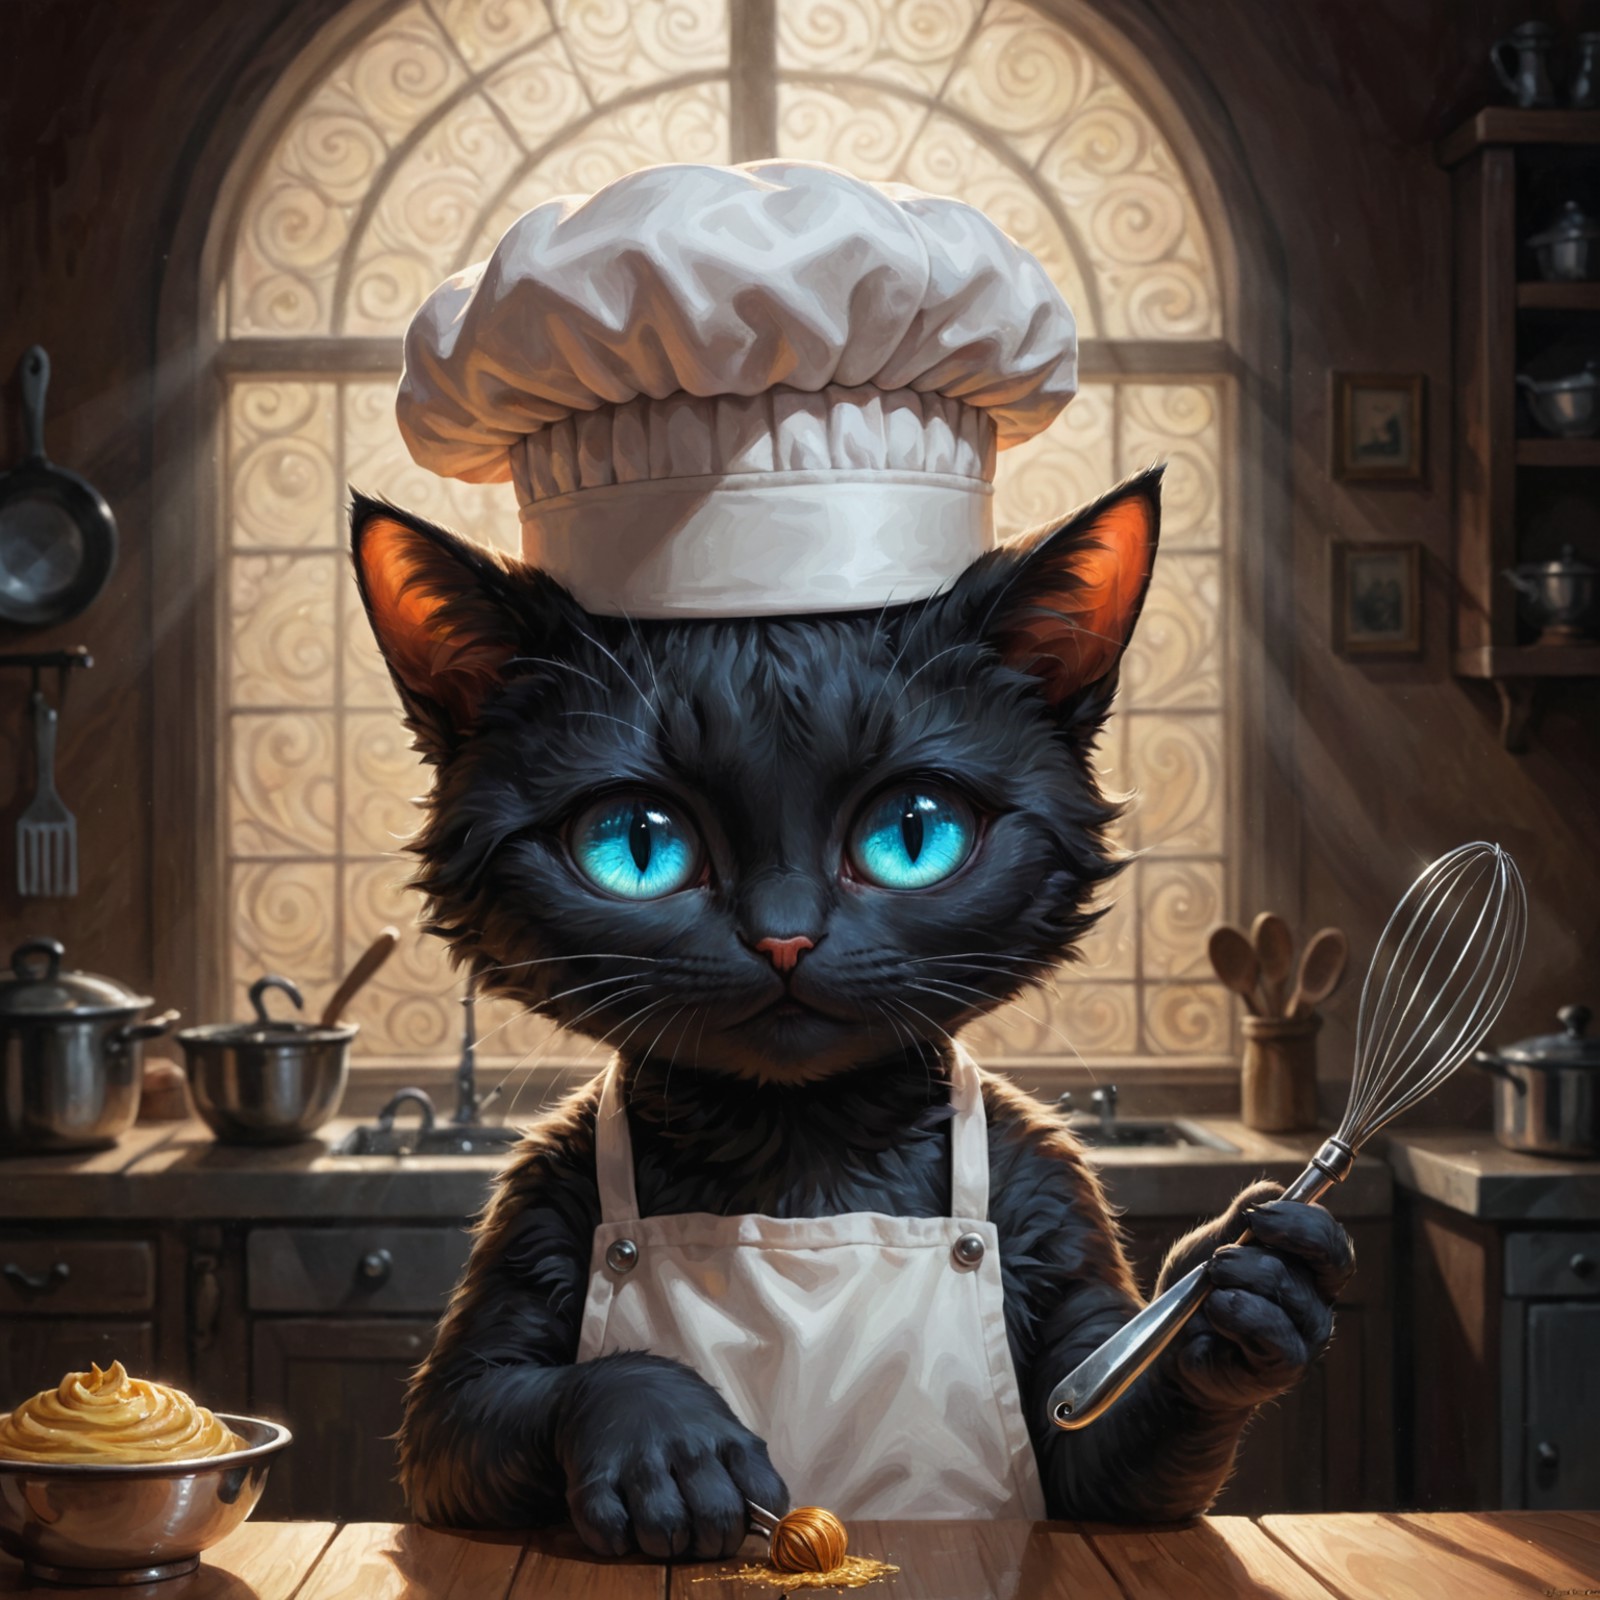 Darkcore aesthetic, a portrait of a cat wearing a tiny chef's hat and holding a miniature whisk, iridescent colors, stunni...